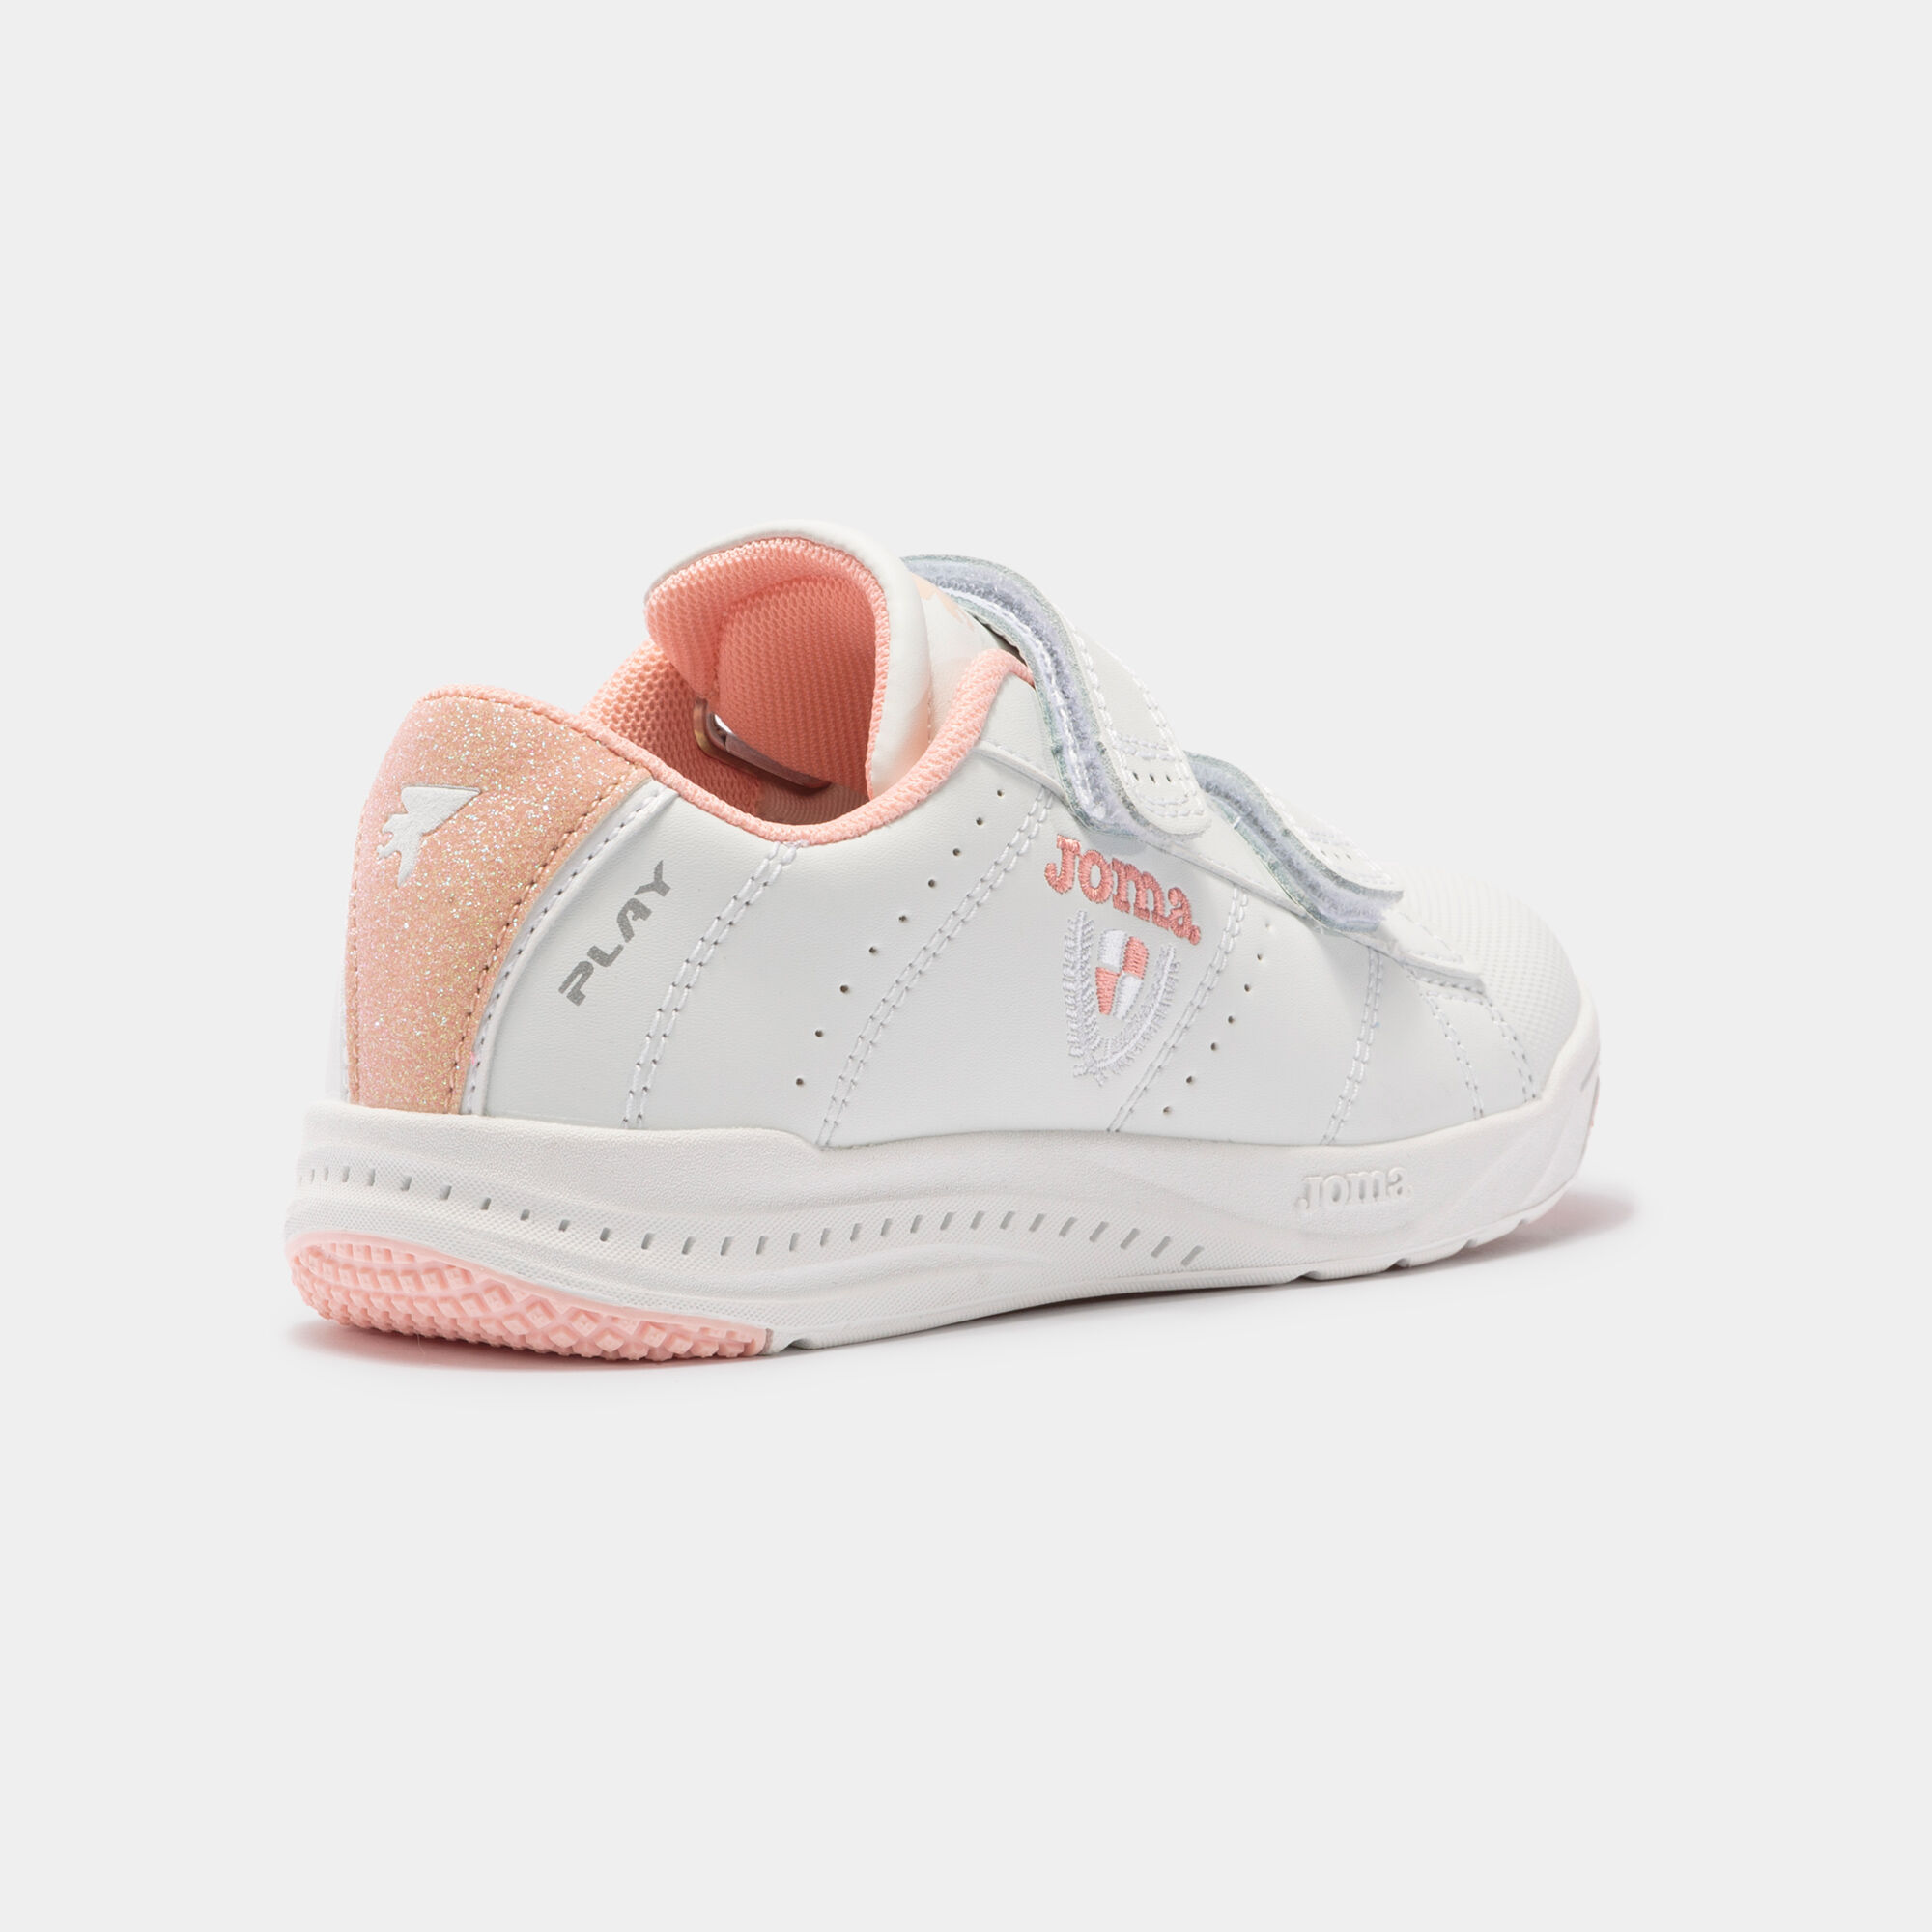 CHAUSSURES CASUAL PLAY 21 JUNIOR BLANC ROSE